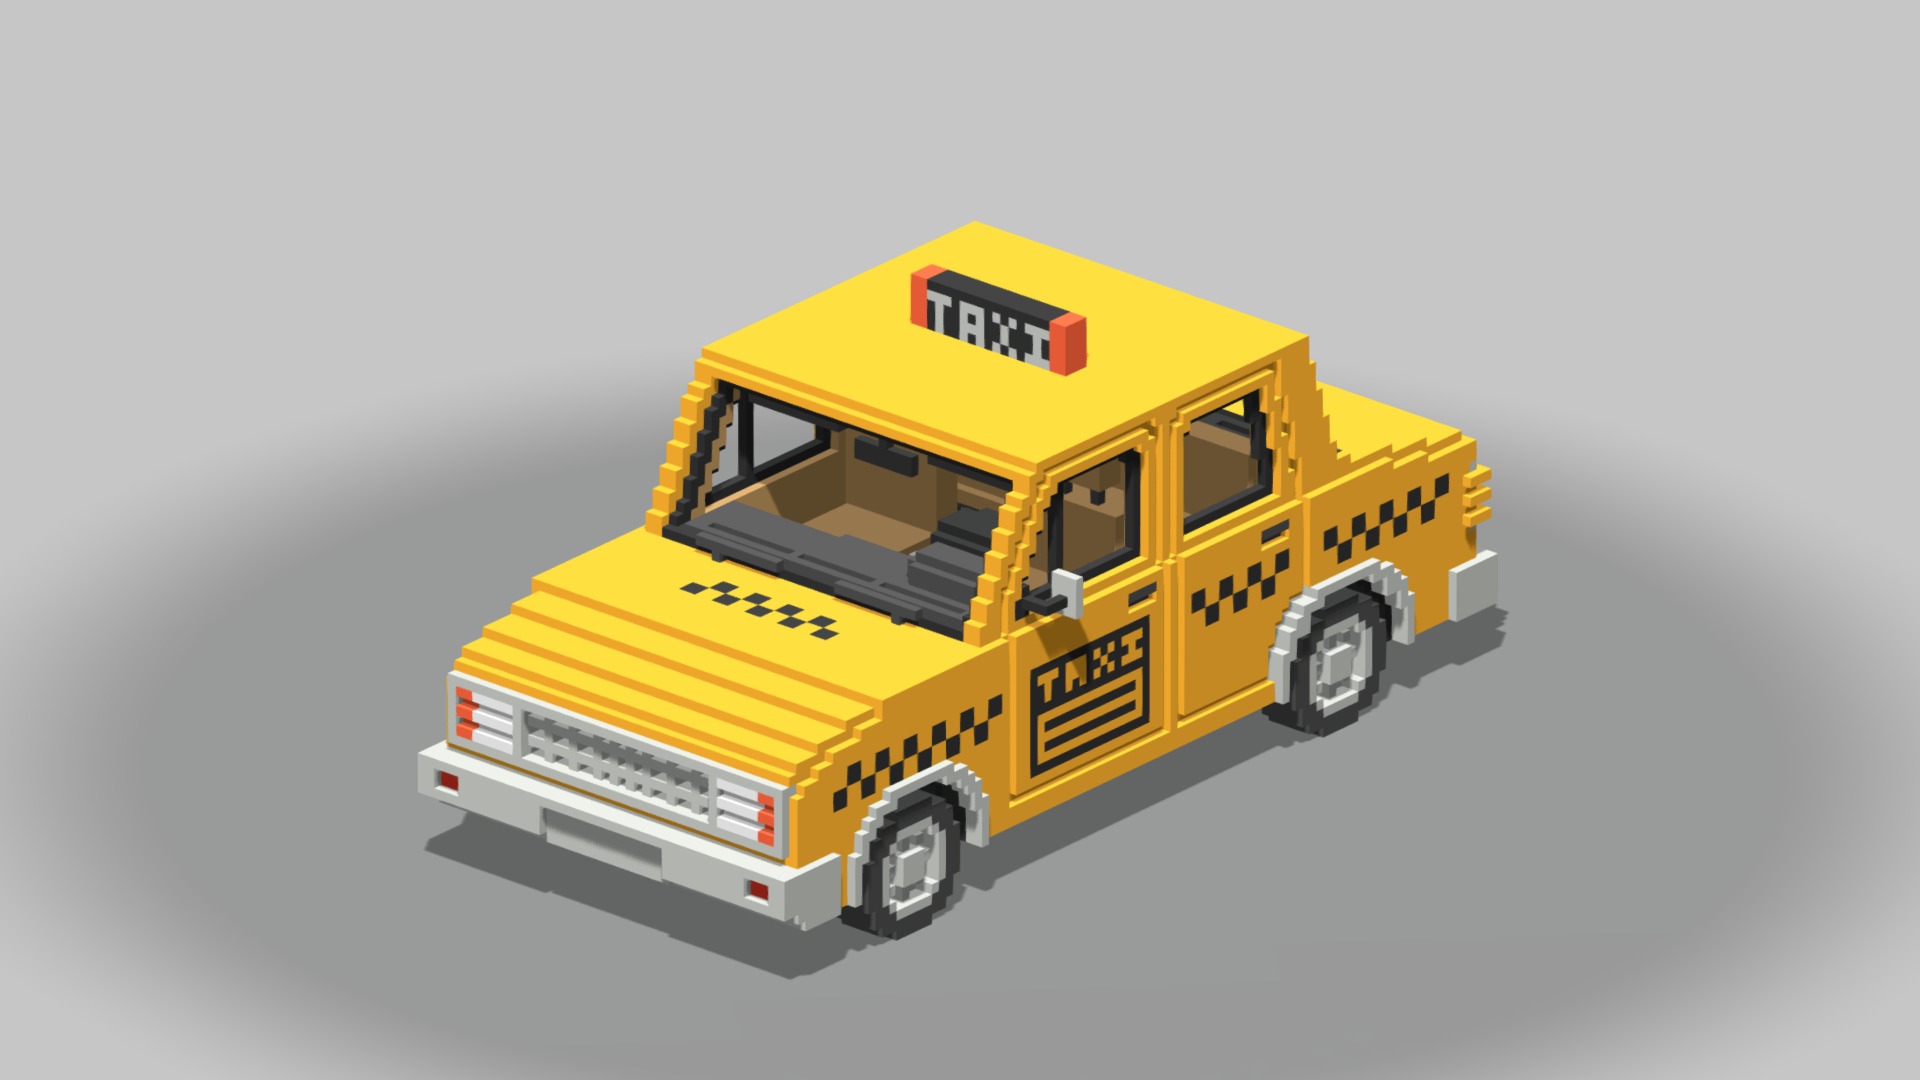 3D model Voxel Taxi - This is a 3D model of the Voxel Taxi. The 3D model is about a yellow truck on a white background.